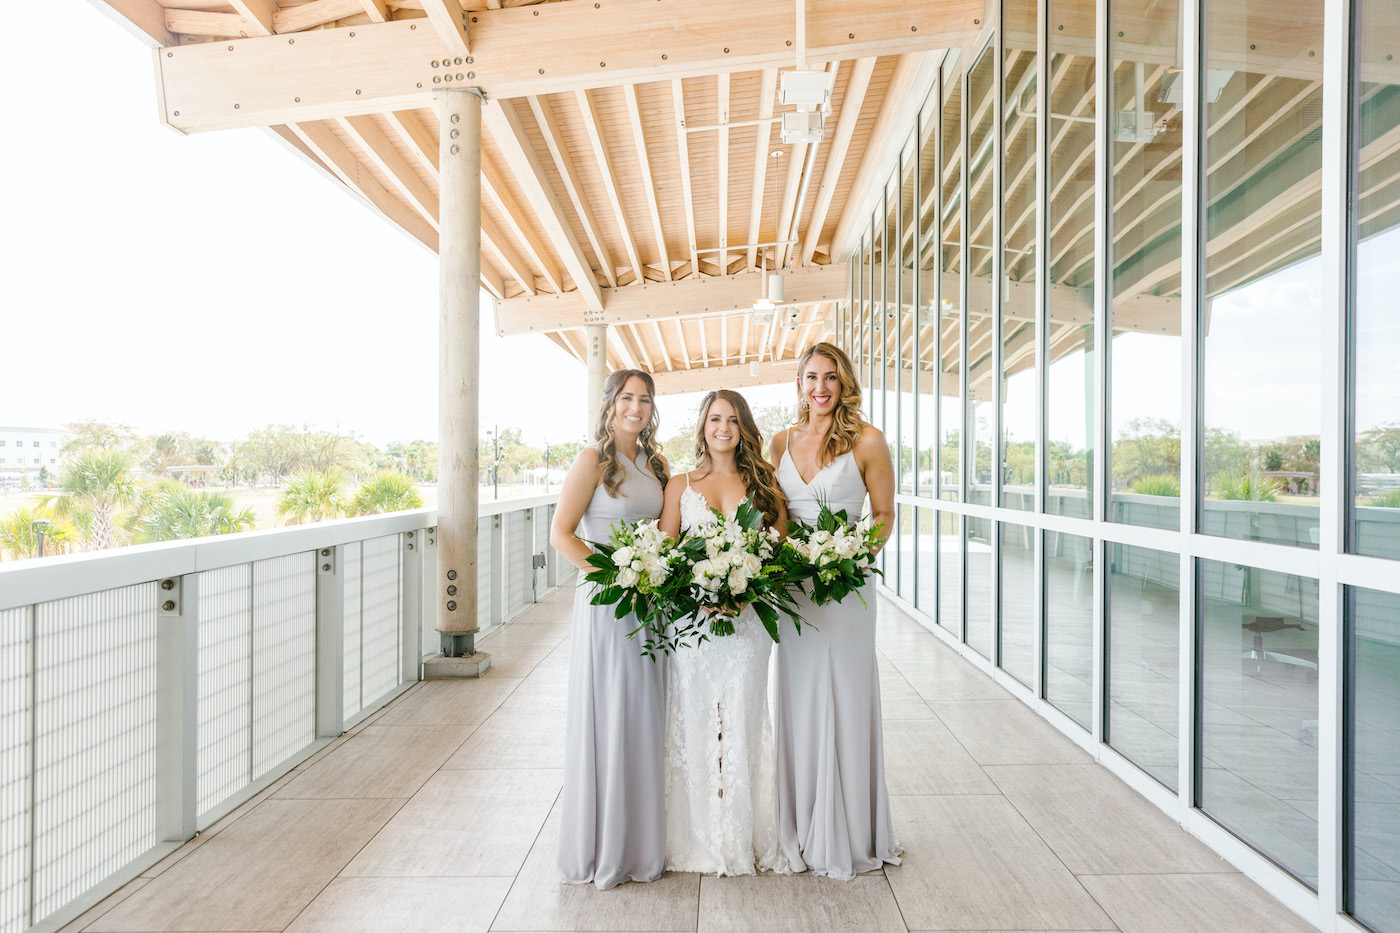 Tampa Wedding Florist Bruce Wayne Florals | Bride and Bridesmaids Portrait Shot | Light Grey Silver Neutral Long Bridesmaid Dresses with Tropical White and Green Bouquets